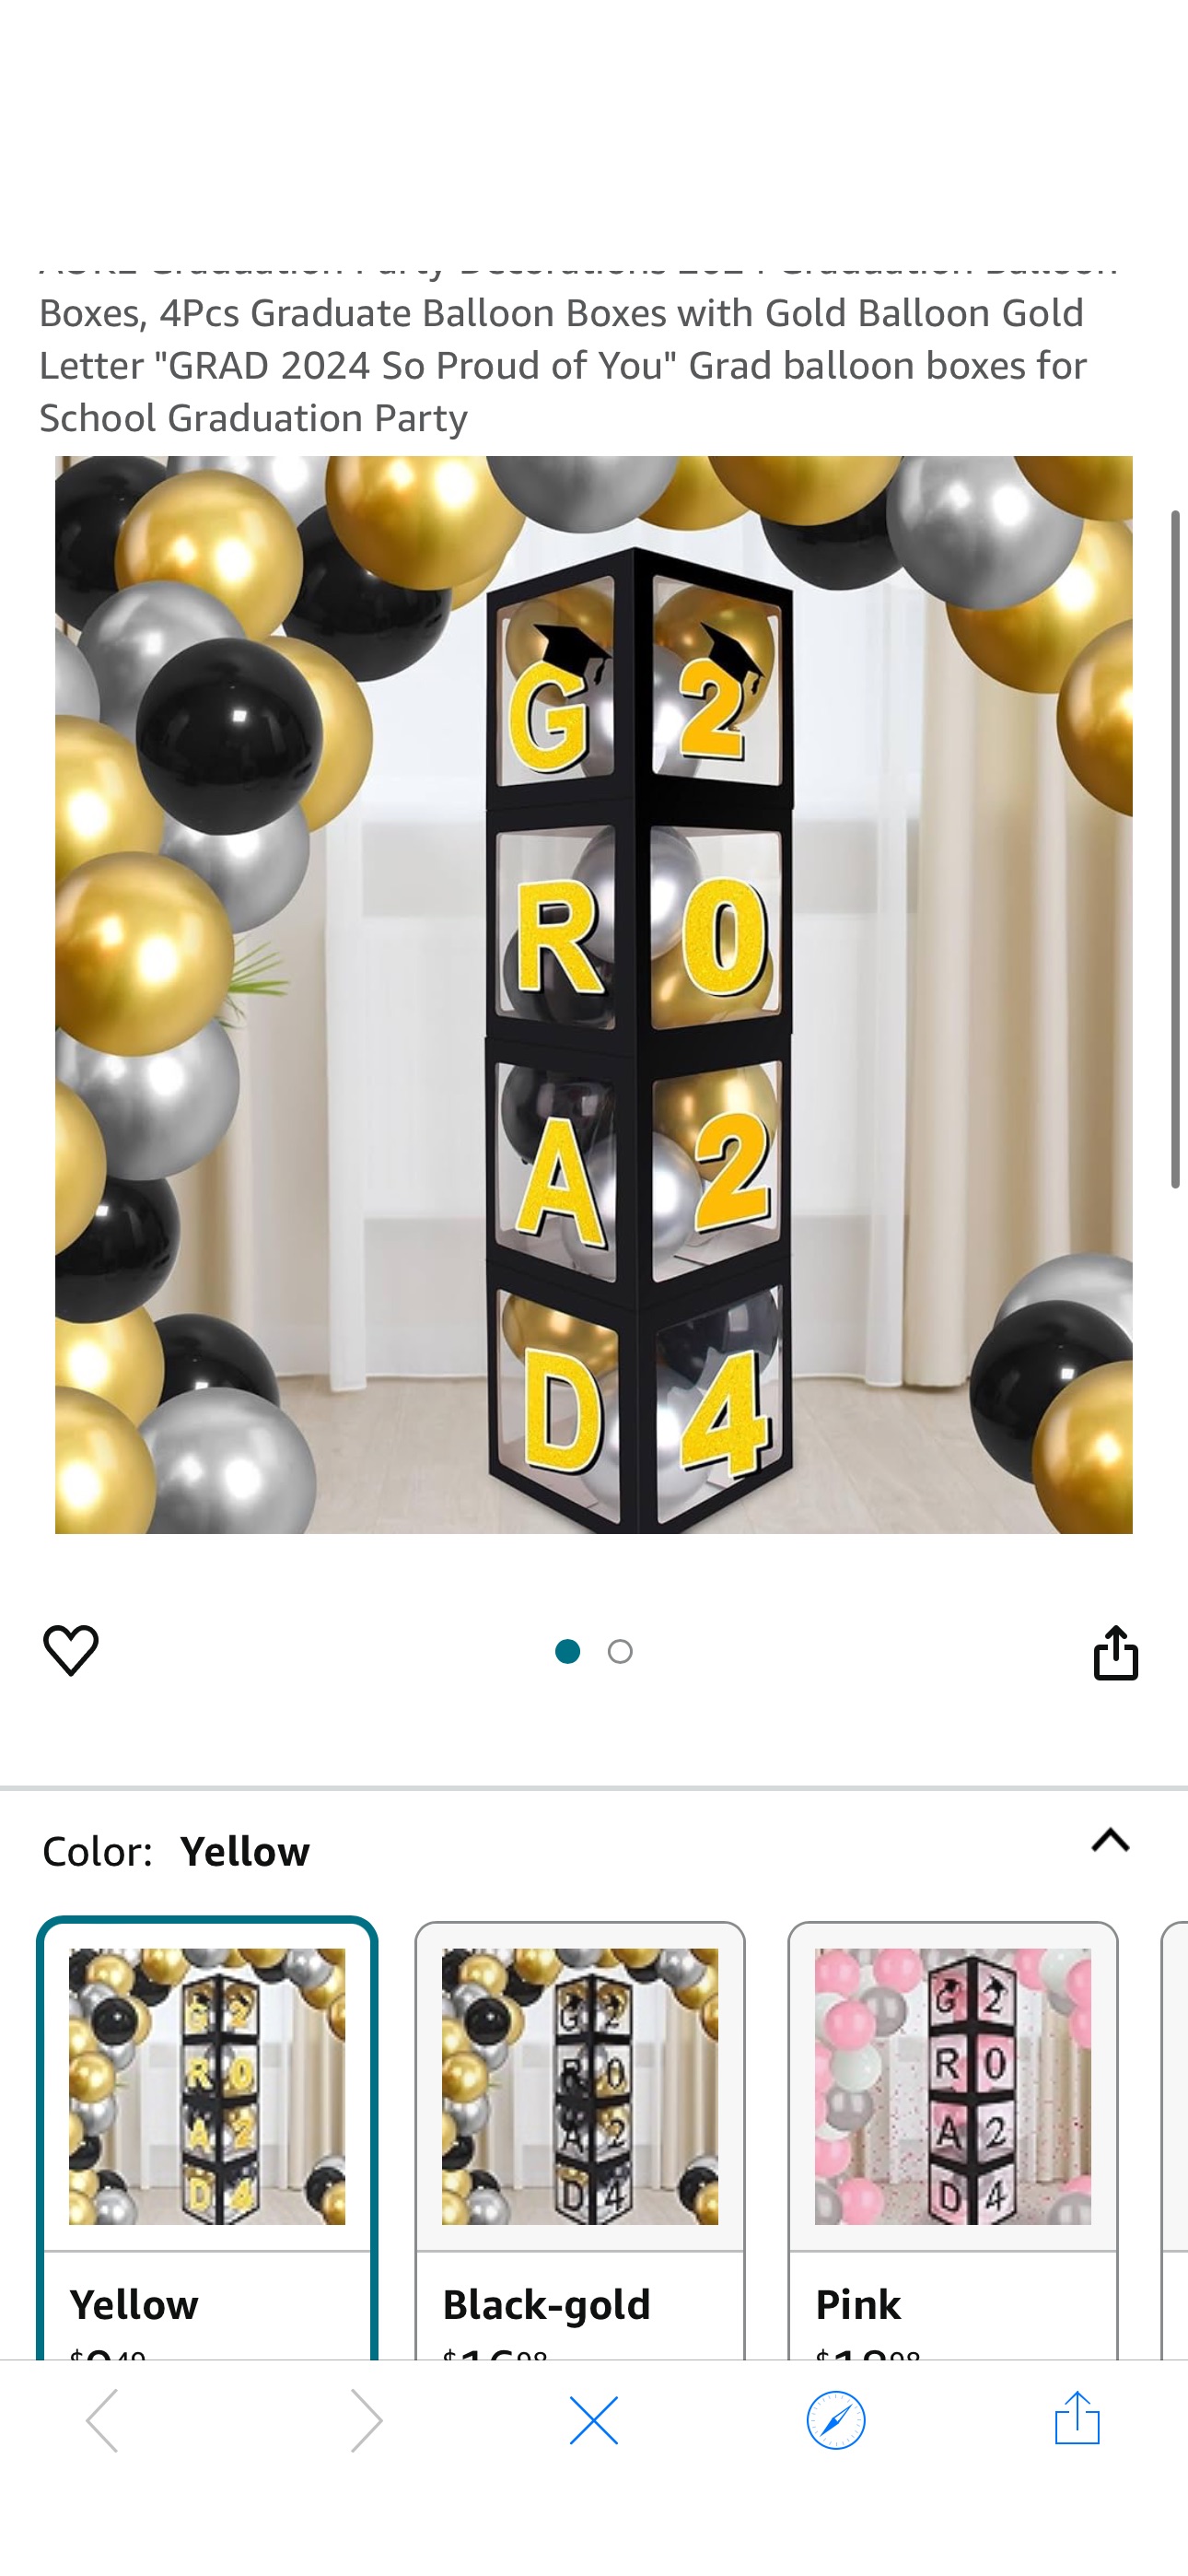 Amazon.com: AOKE Graduation Party Decorations 2024 Graduation Balloon Boxes, 4Pcs Graduate Balloon Boxes with Gold Balloon Gold Letter "GRAD 2024 So Proud of You" Grad balloon boxes for School Graduat